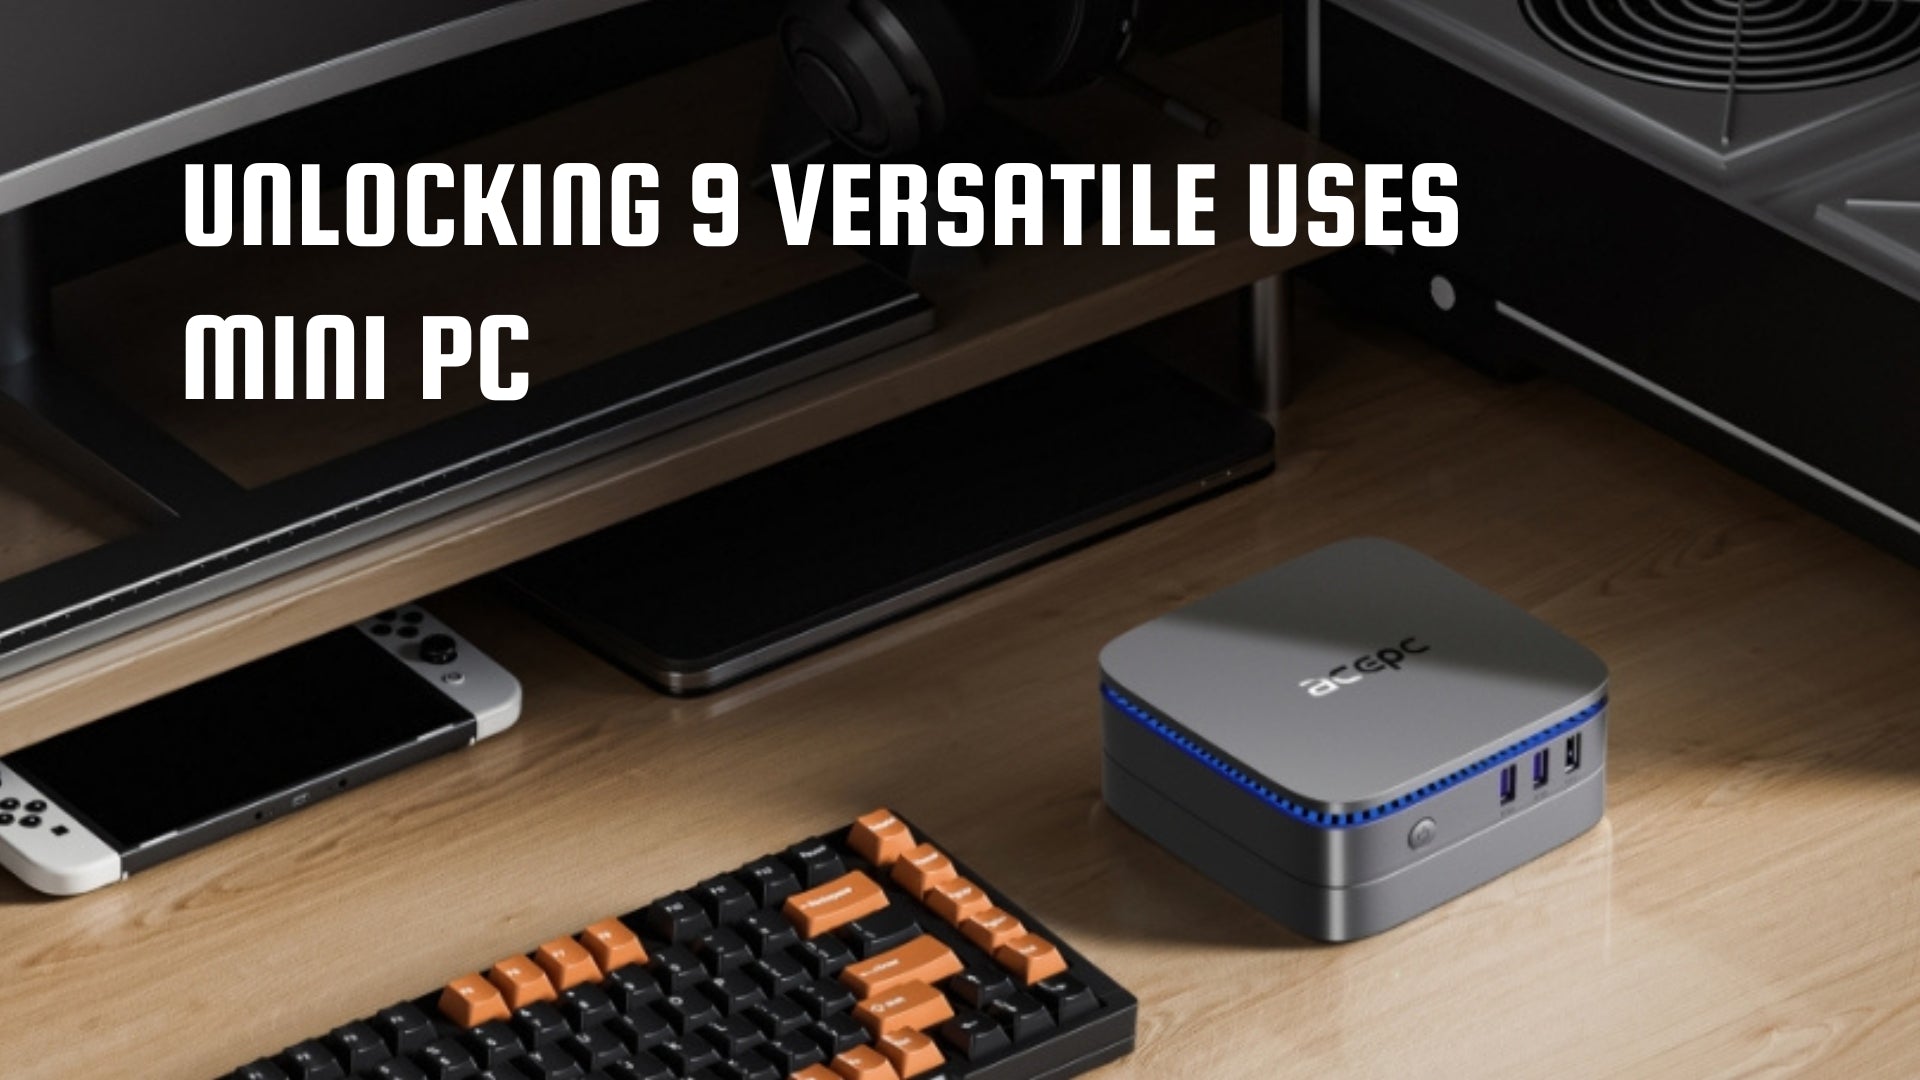 What are the uses of a mini PC?